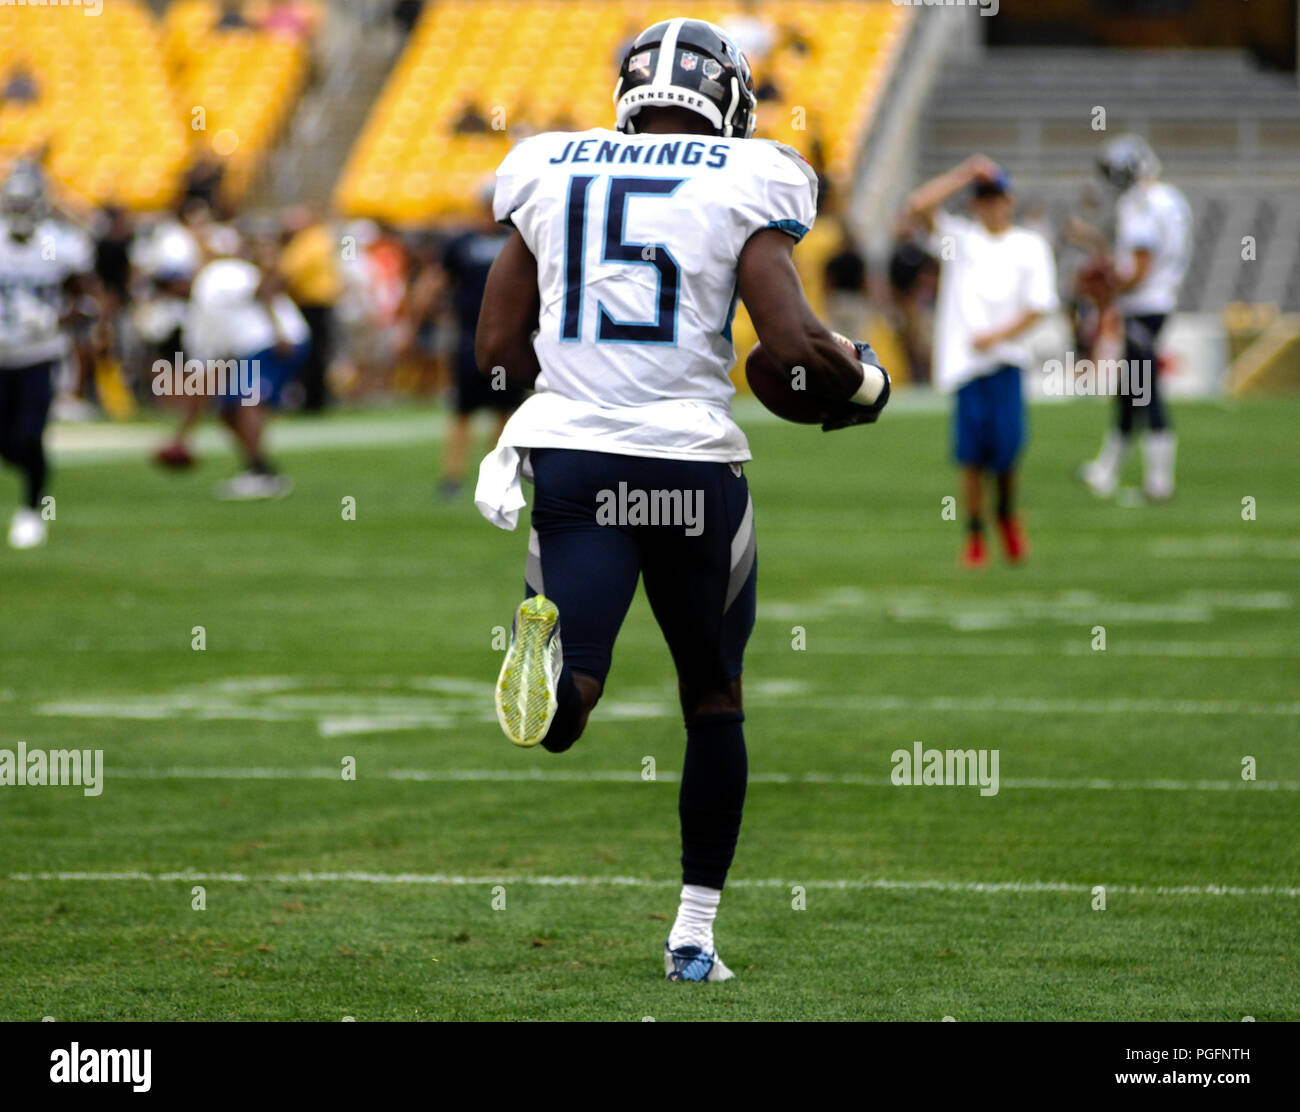 tennessee titans 15